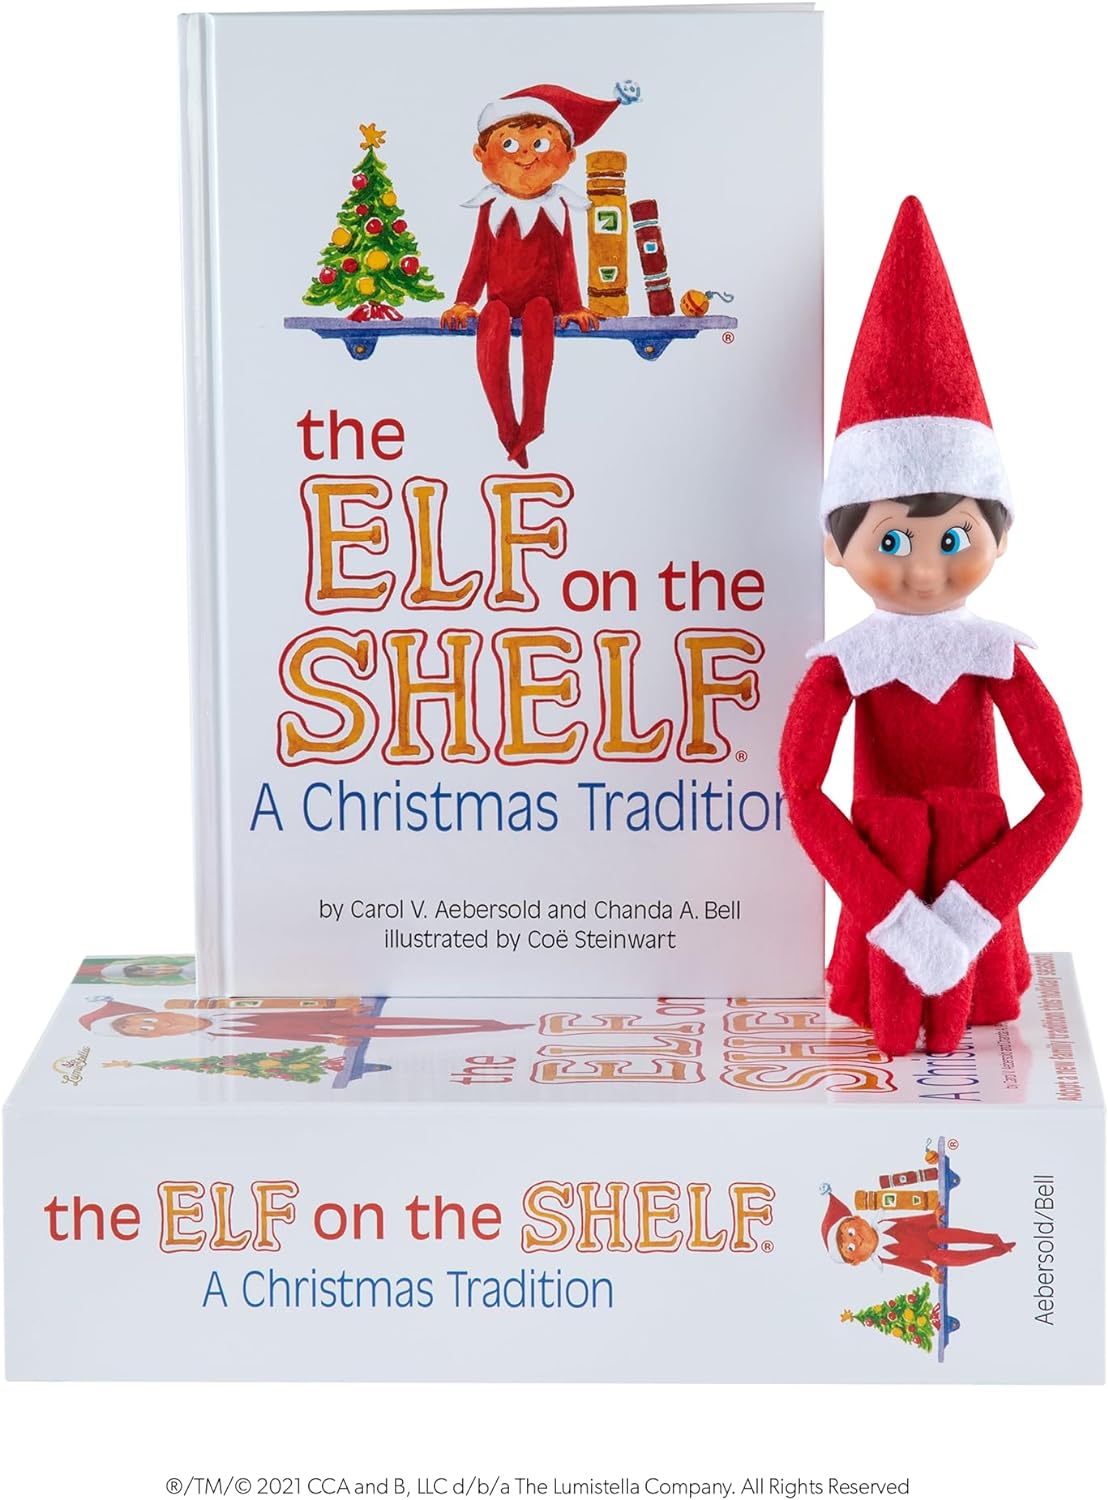 The Elf on the Shelf: A Christmas Tradition - Boy Scout Elf with Blue Eyes - Includes Artfully Illustrated Storybook, Keepsake Box and Official Adoption Certificate